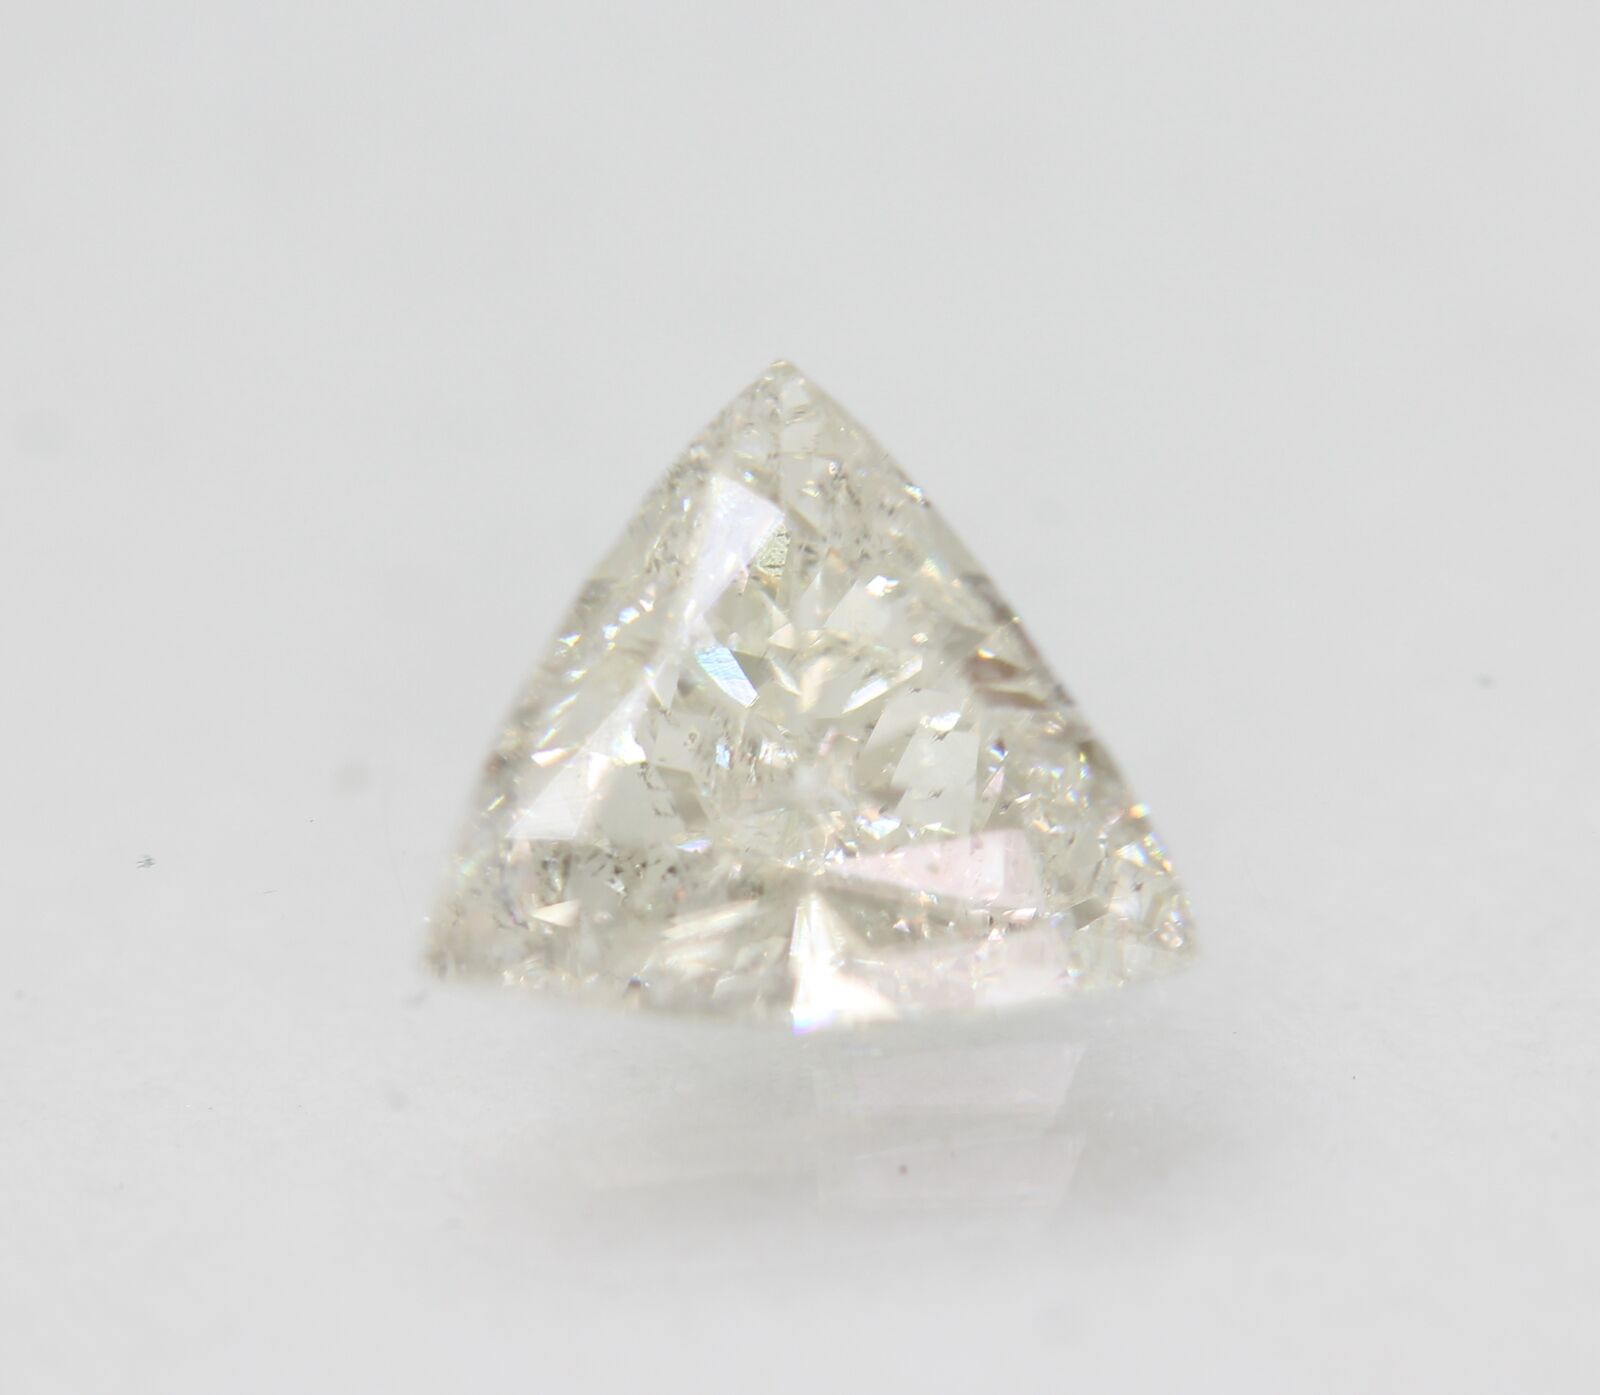 Certified 1.22 Ct G Vs2 Triangle Enhanced Natural Loose Diamond 8.24x7.85mm 2vg